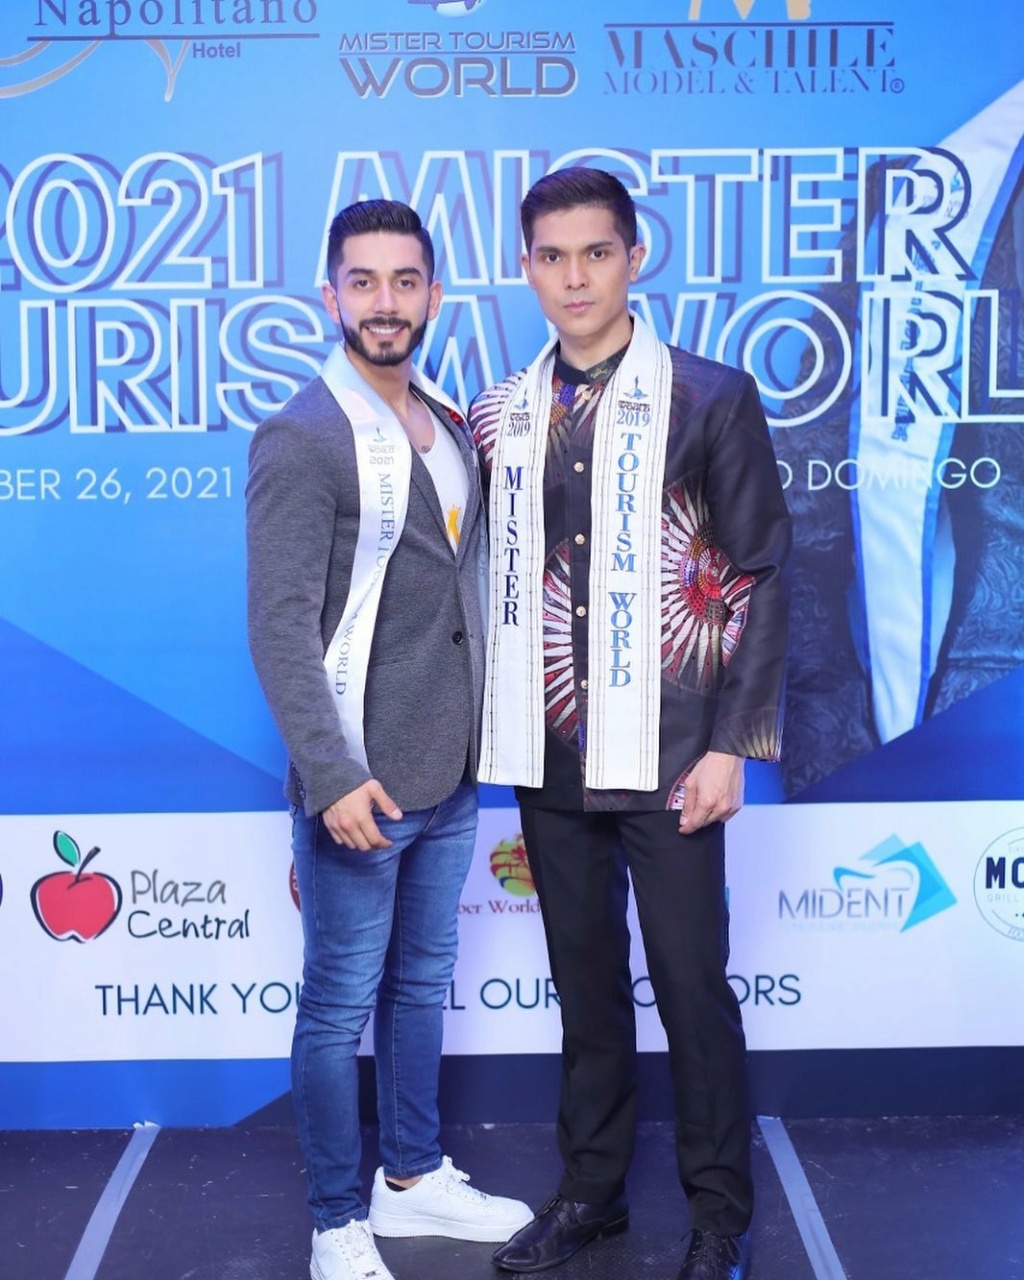 5th Mister Tourism World 2020/2021 is Dominican Republic - Page 2 26217010